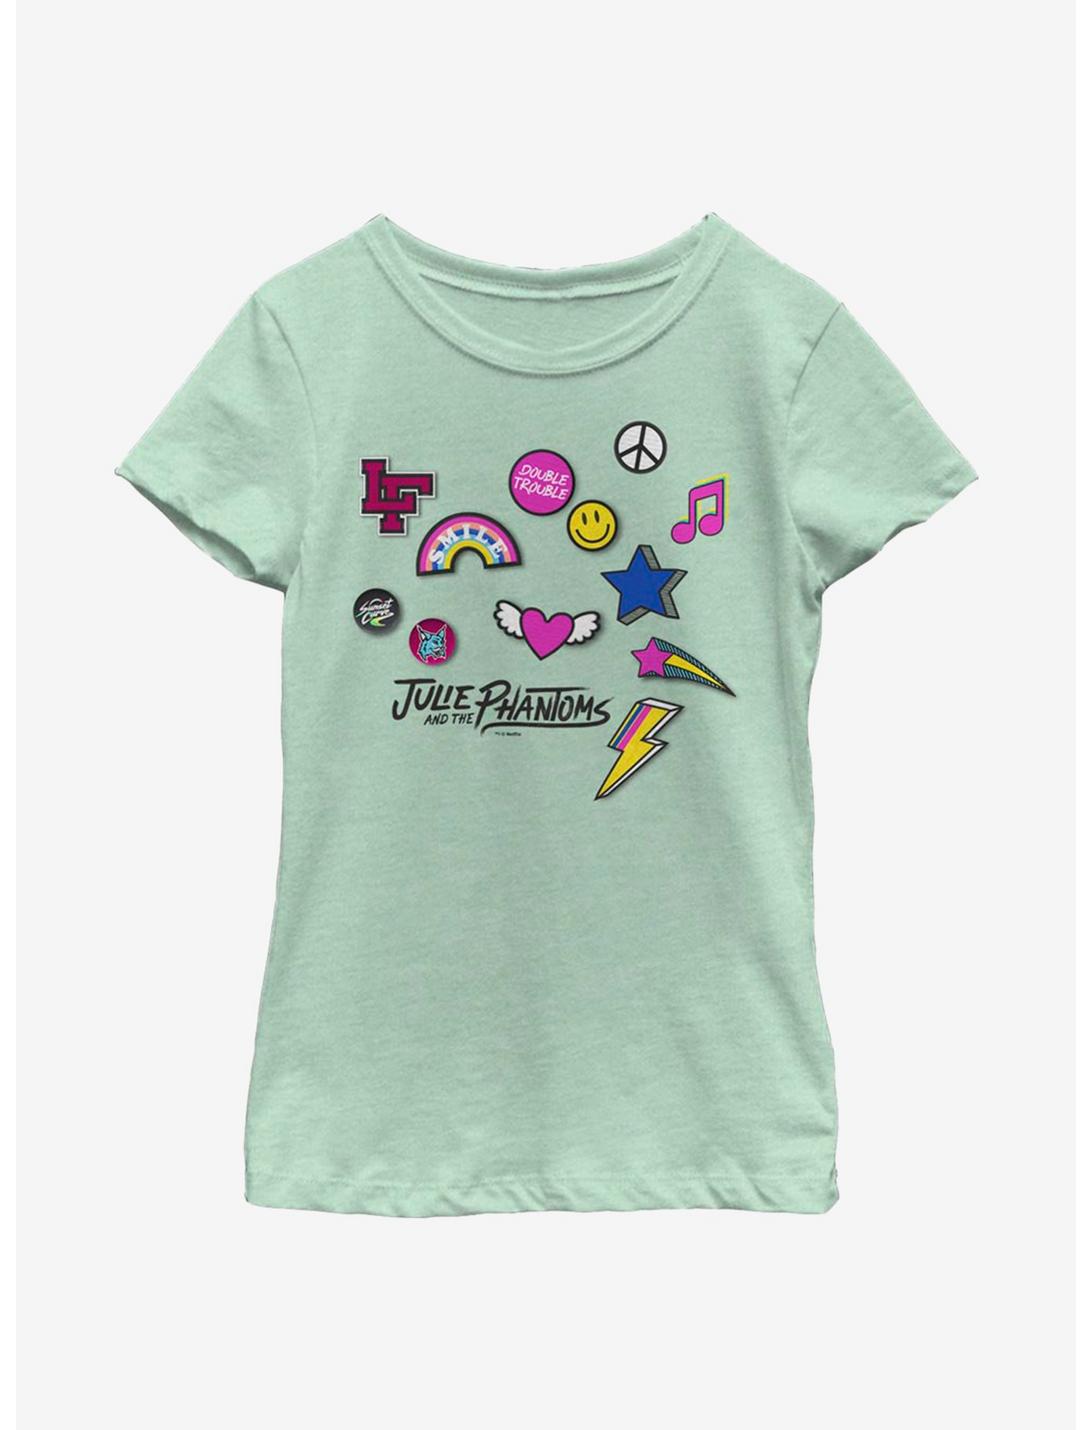 Julie And The Phantoms Icons Youth Girls T-Shirt, MINT, hi-res